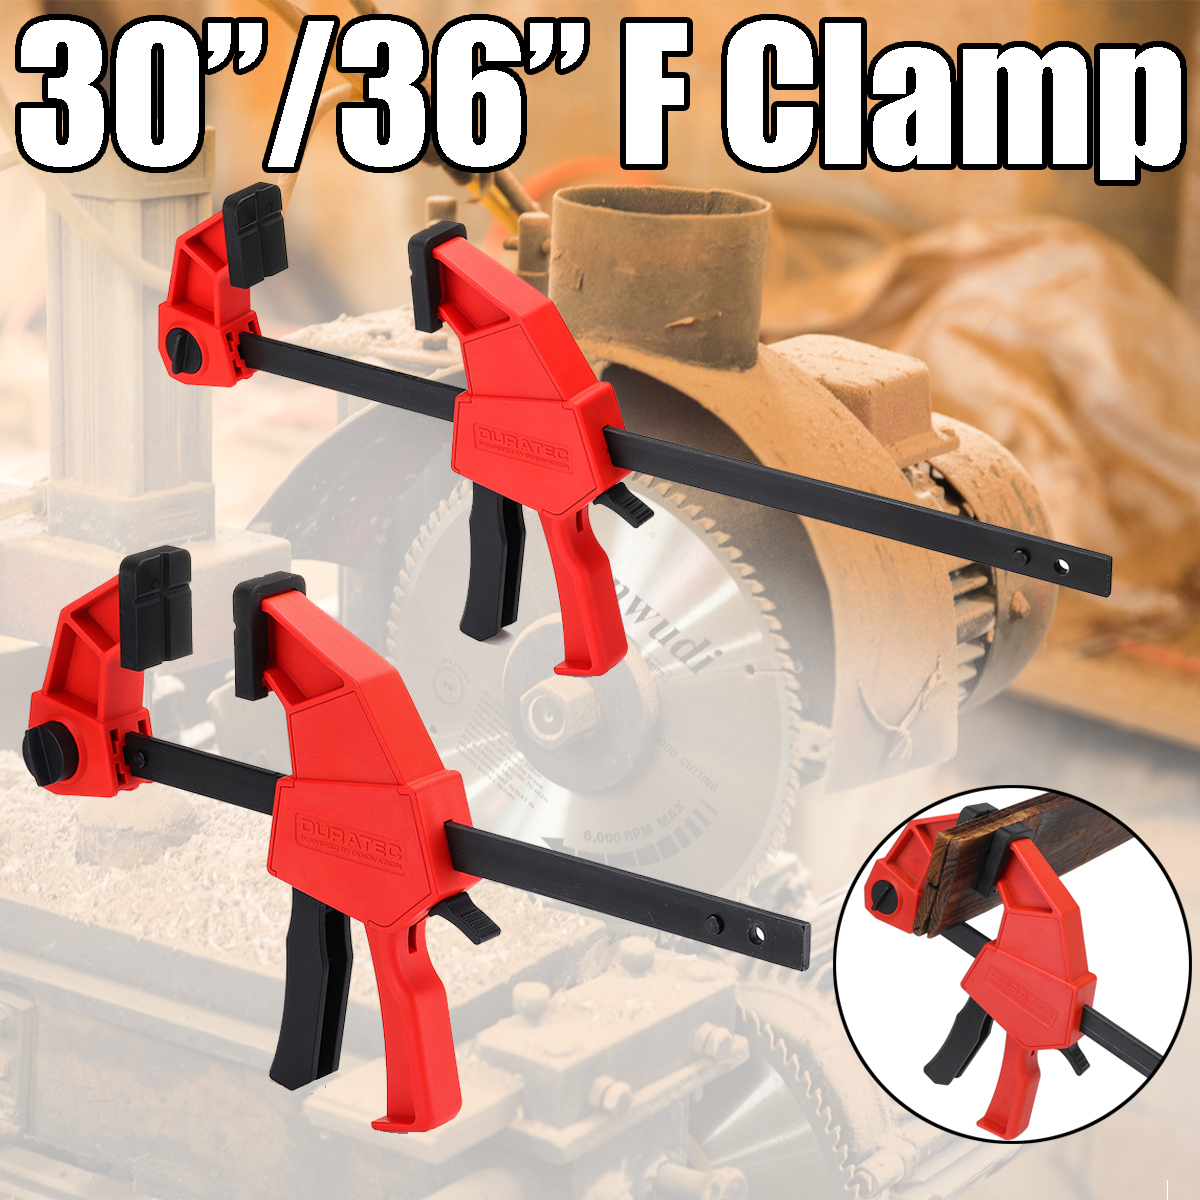 3036Inch-Heavy-Duty-F-Clamp-WoodWorking-Quick-Grip-Bar-Plastic-Grip-Wood-Clamp-1630185-1